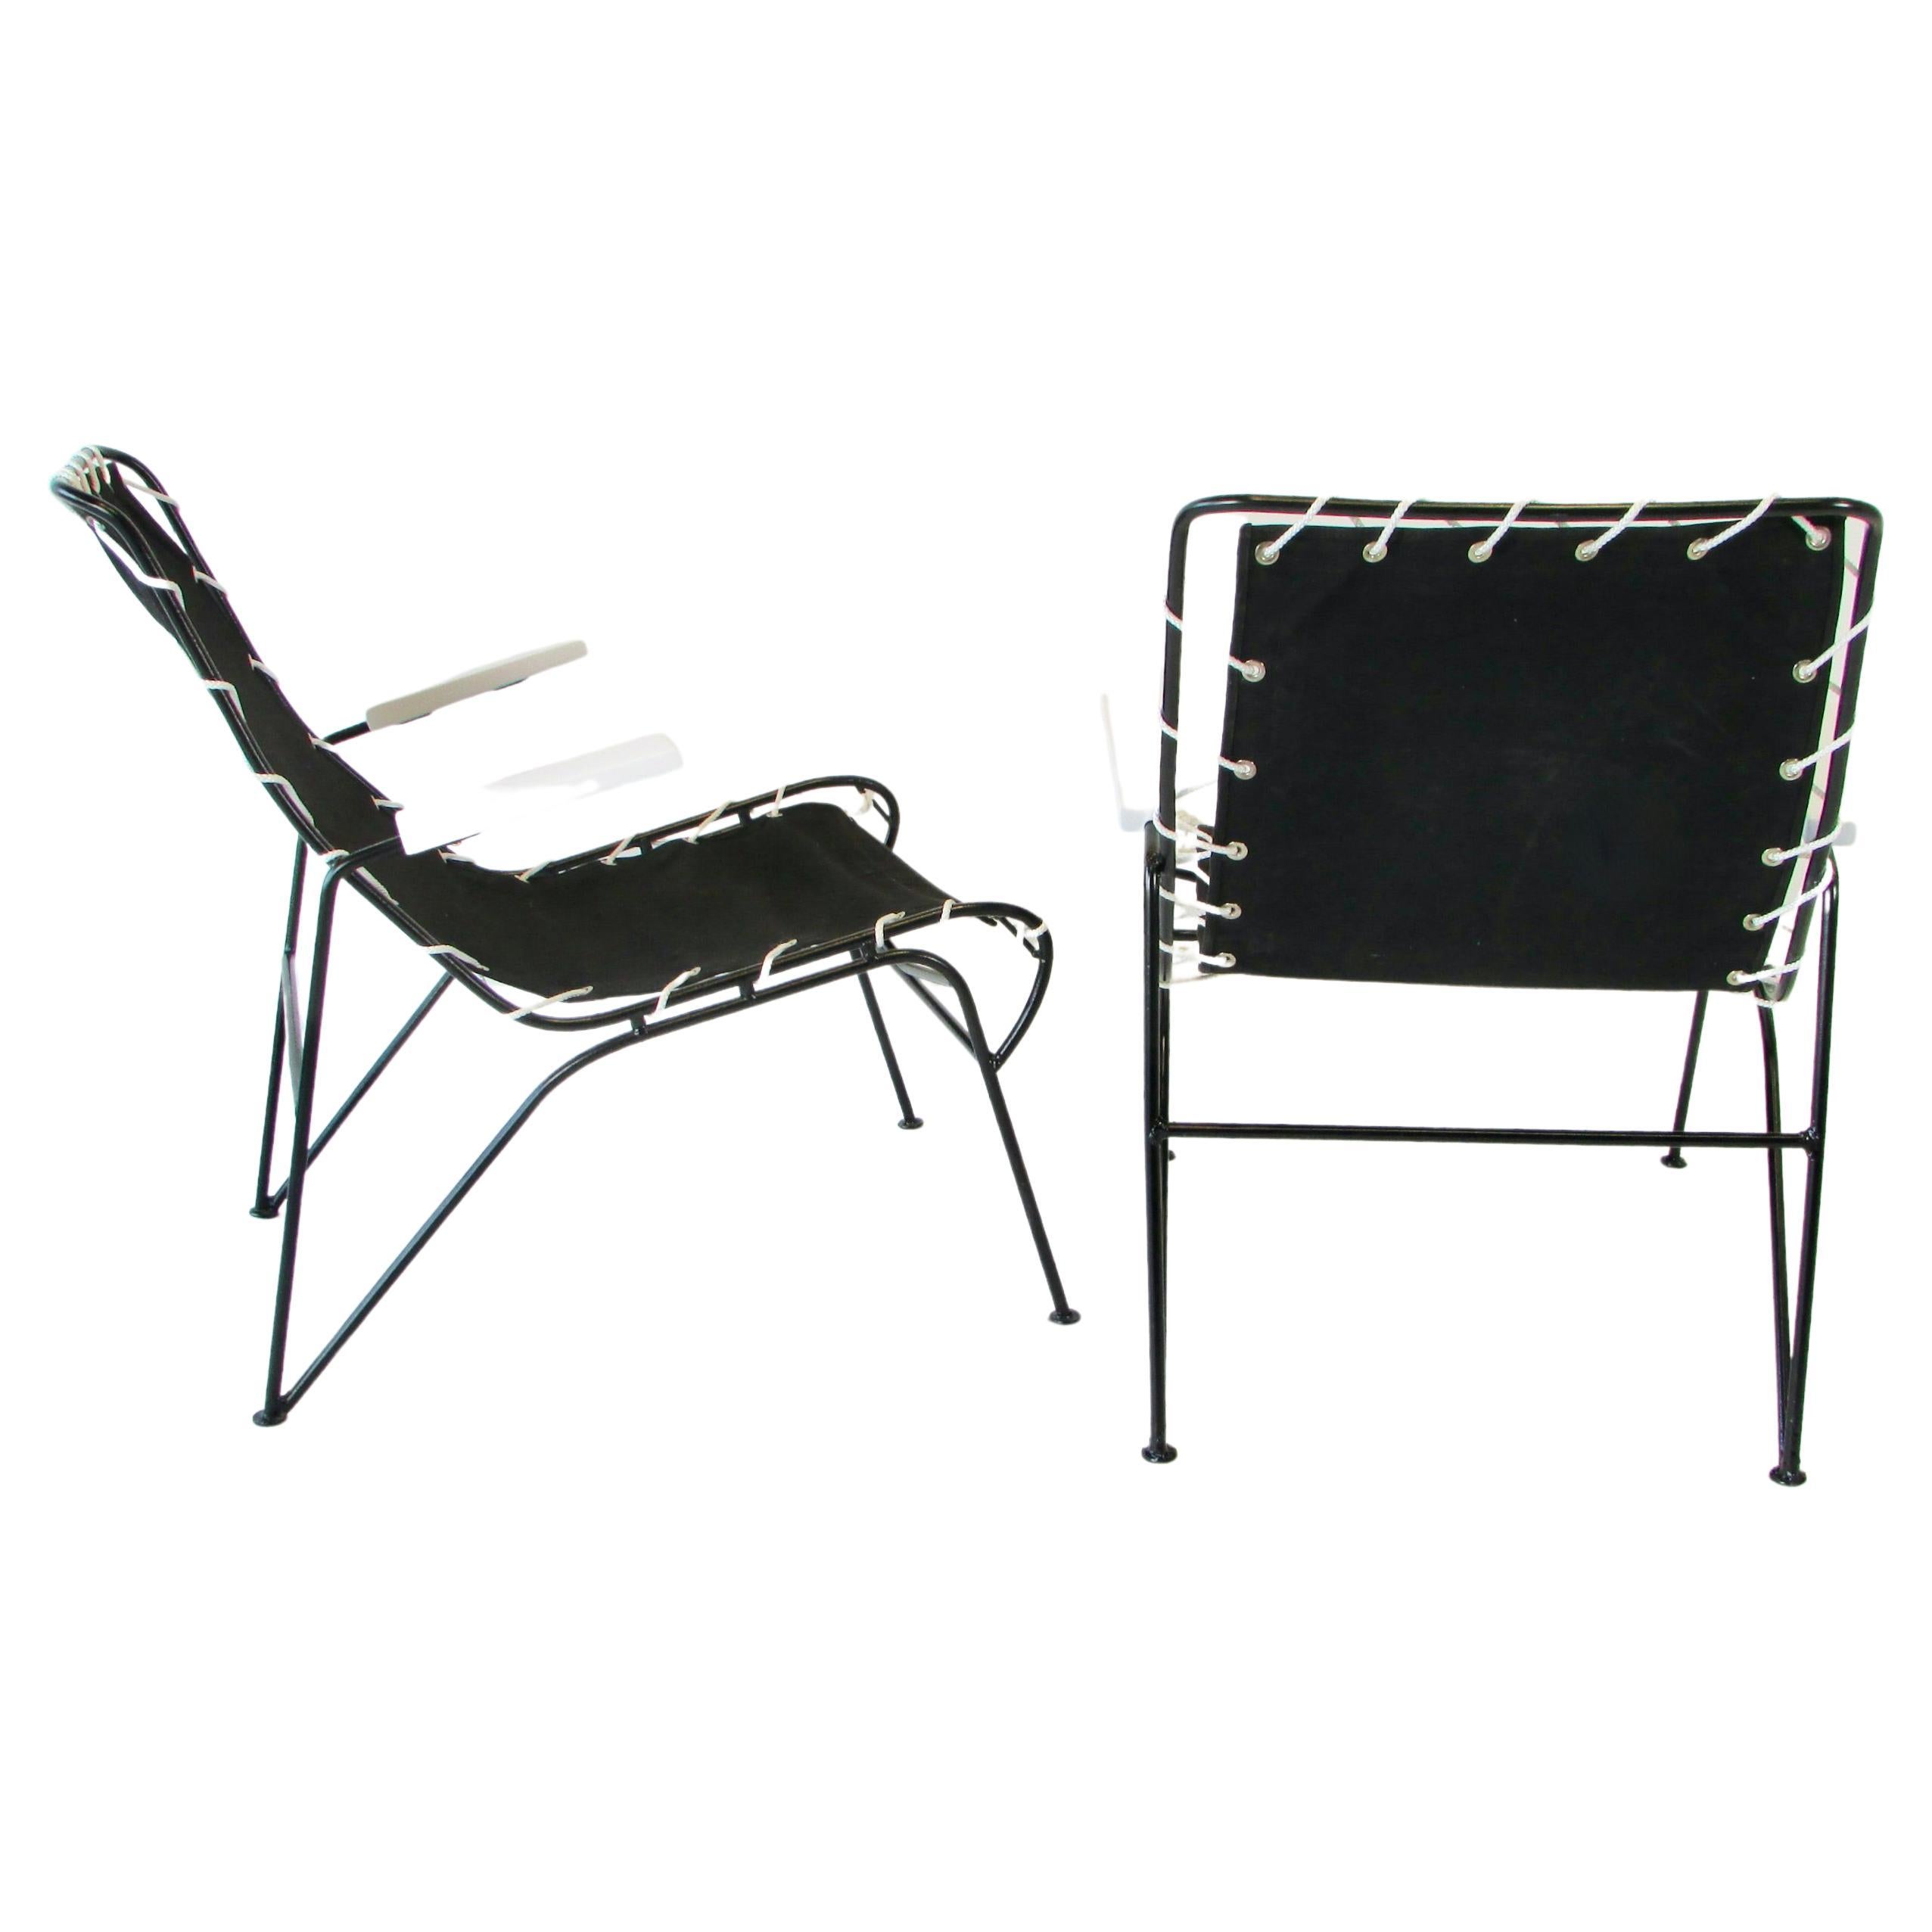 Pair of Pipsin Saarinen Swanson Wrought Iron Frame Chairs with Canvas Sling Seat